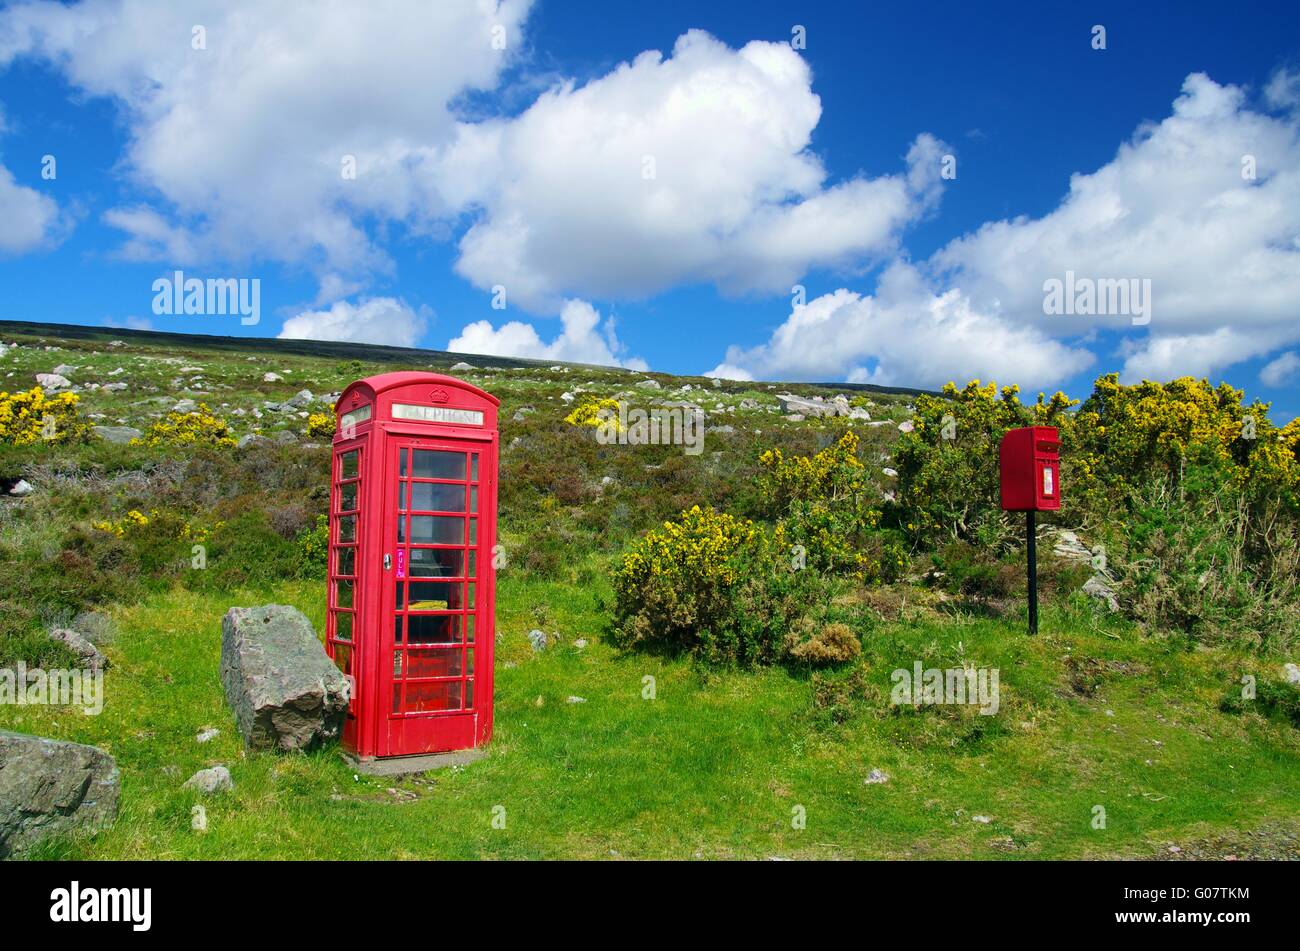 Telefone and letterbox in the mid of nowwhere Stock Photo